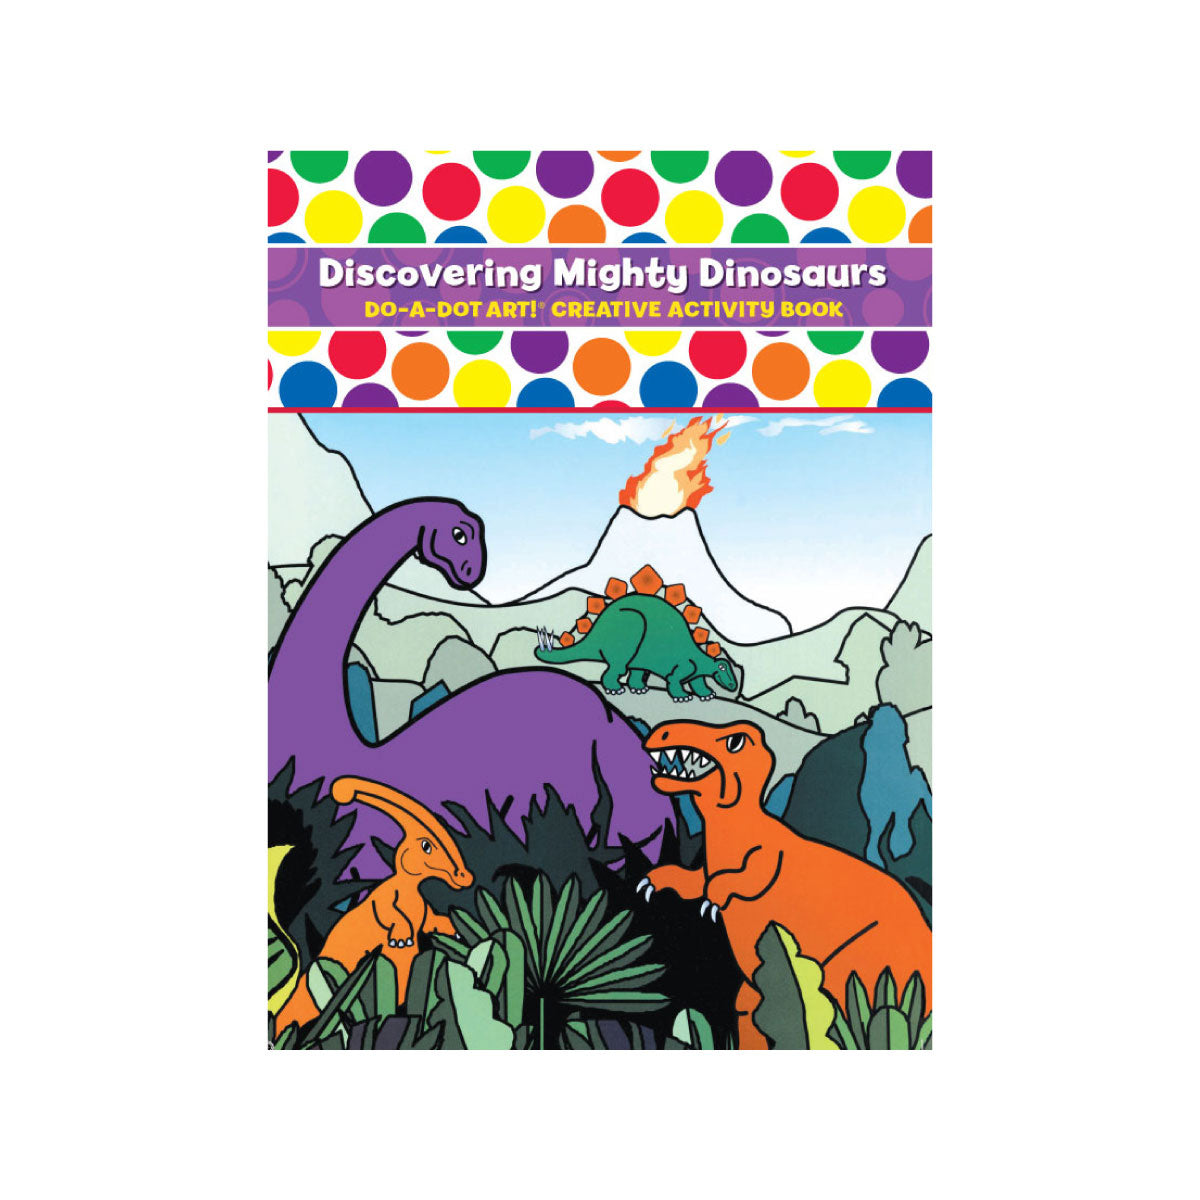 Do a Dot Art Creative Activity Books Discovering Mighty Dinosaurs